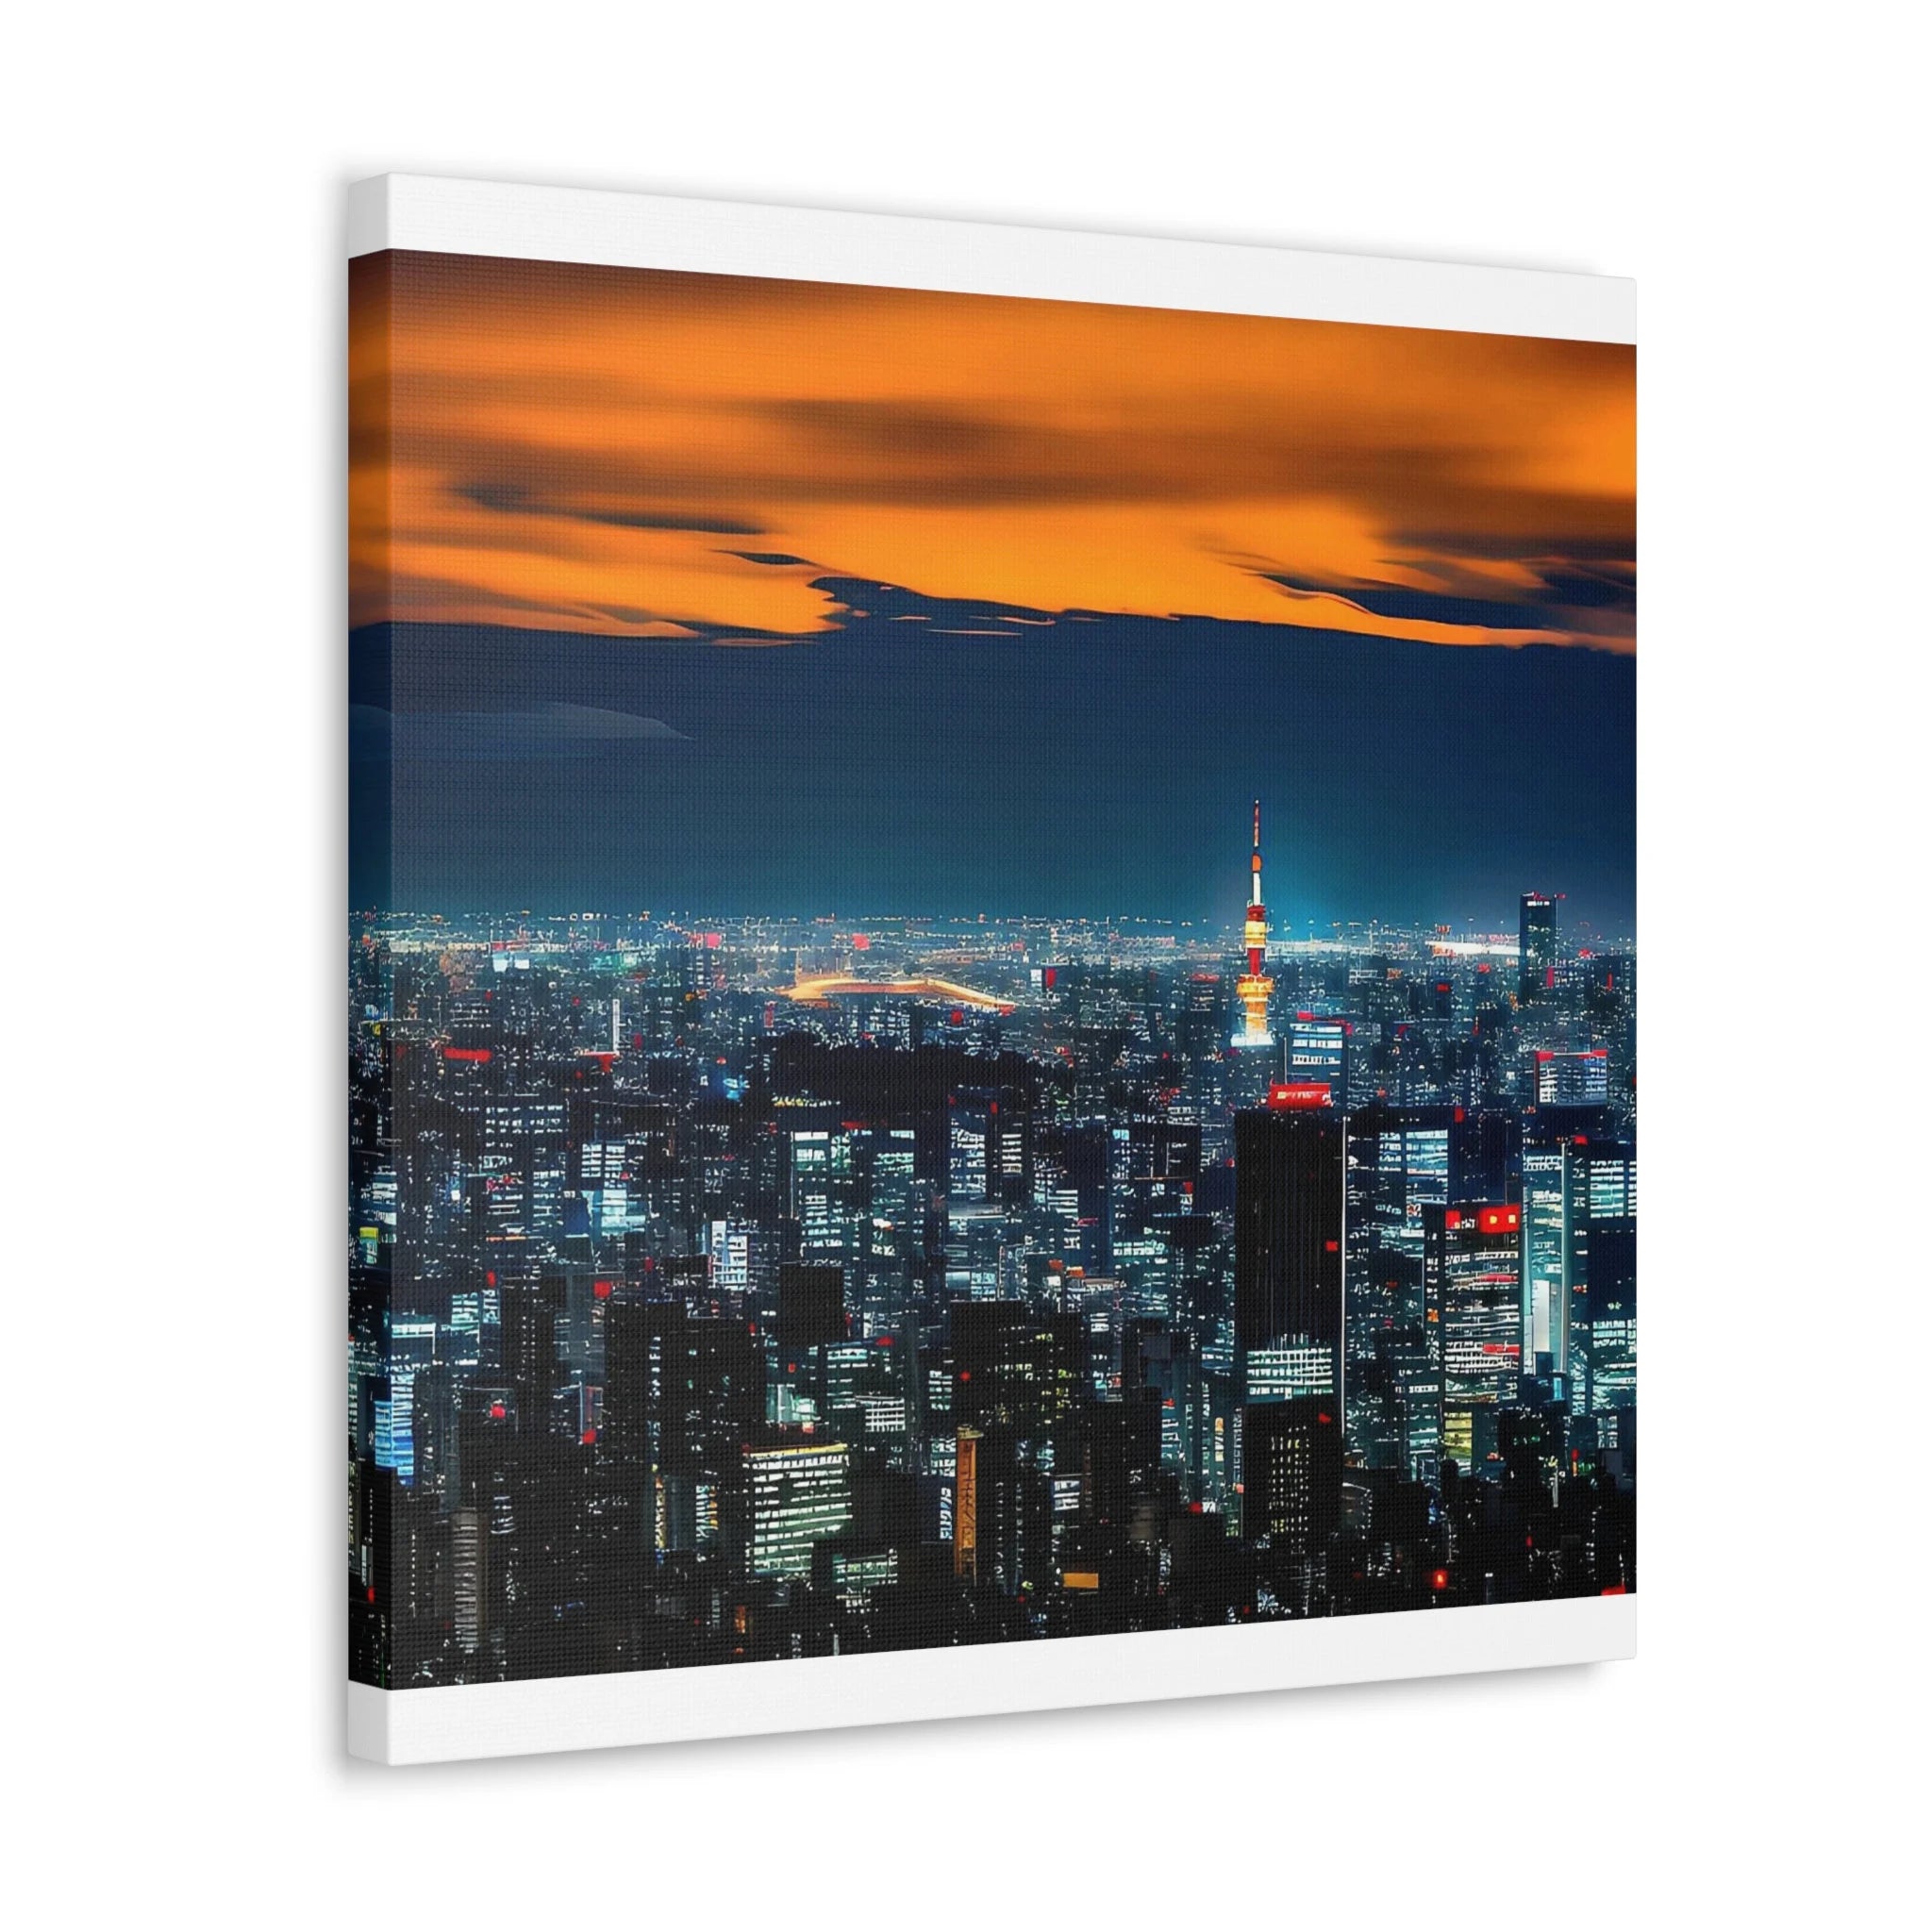 Deal Changer Canvas in many sizes, Landscape | Portait | Square, printed to order.  We specialize in various cities around the world such as Japan, England, France, Egypt, Bali, Fuji, Spain & much much more!